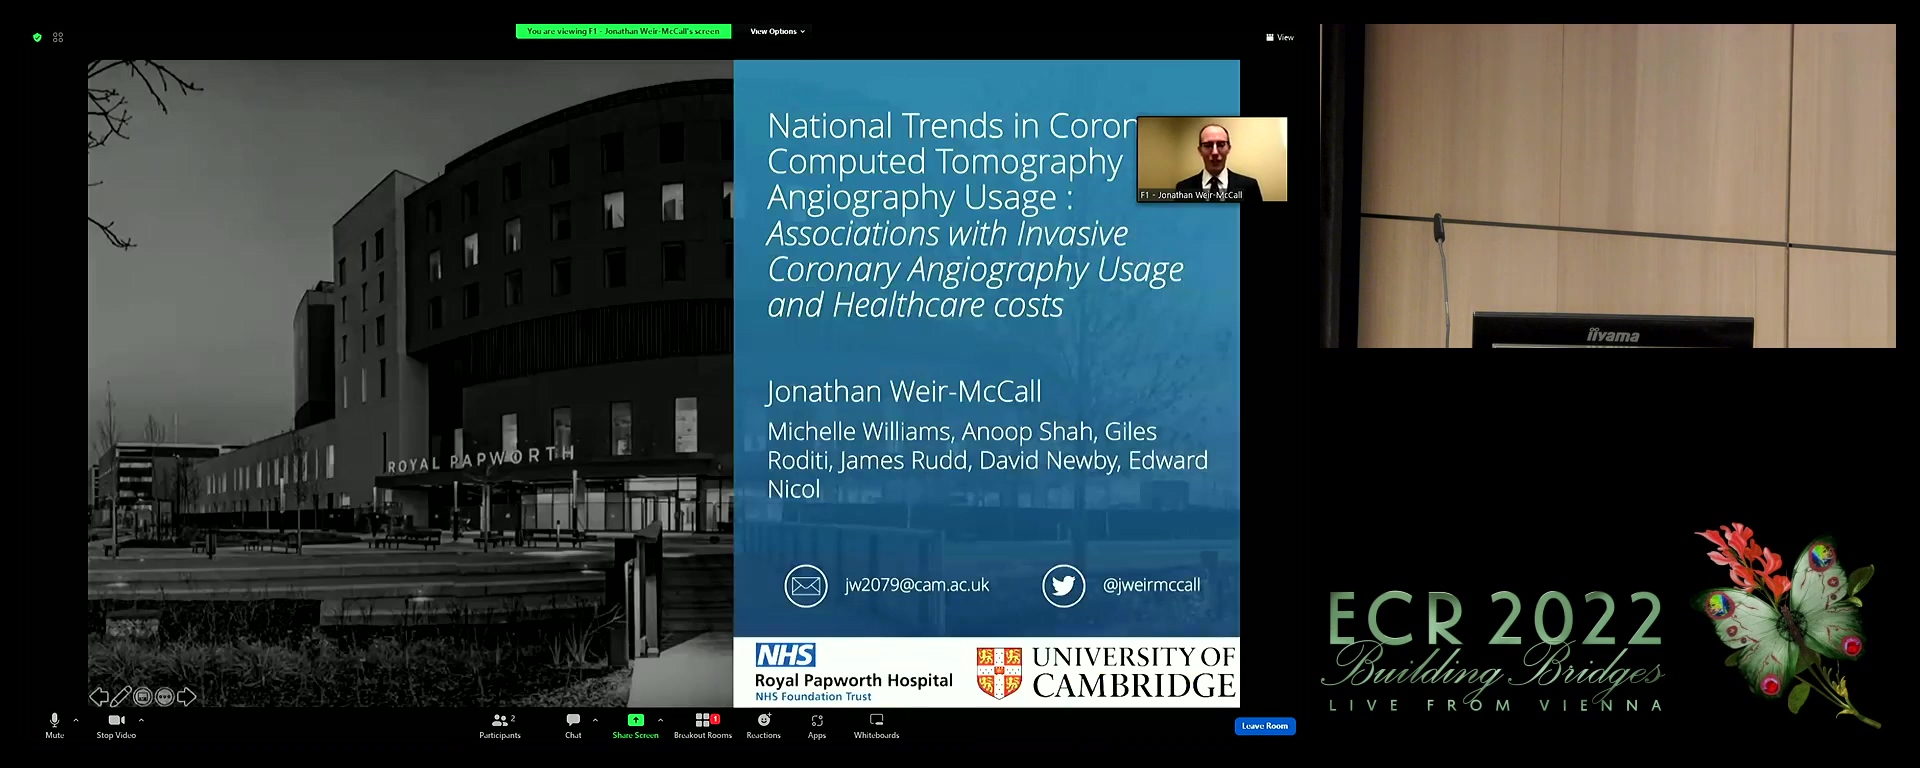 National trends in coronary computed tomography angiography usage: associations with invasive coronary angiography usage and healthcare costs - Jonathan R. Weir-Mccall, Cambridge / UK